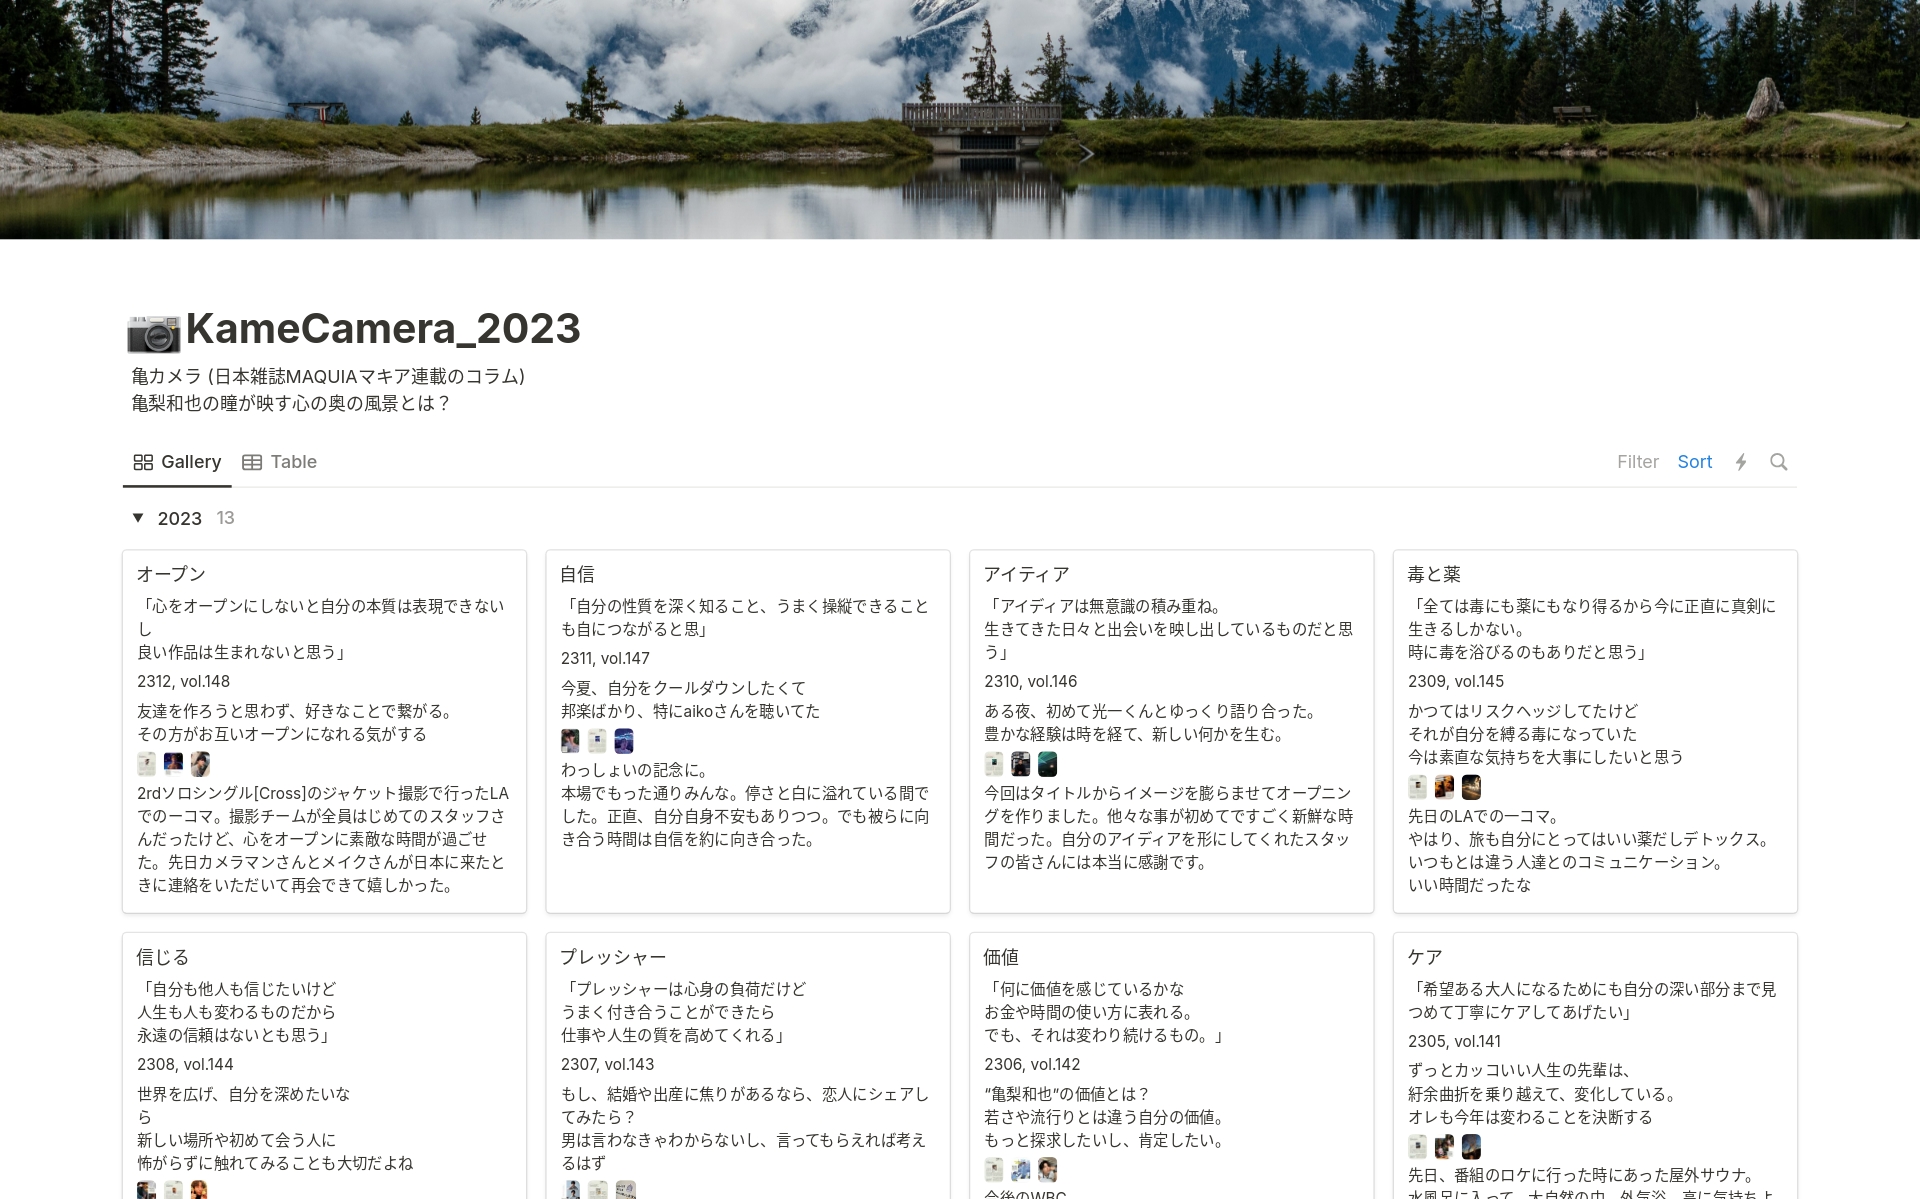 A Notion template to collect pages of a Japanese magazine column. Make it easy to search and become an idea source.